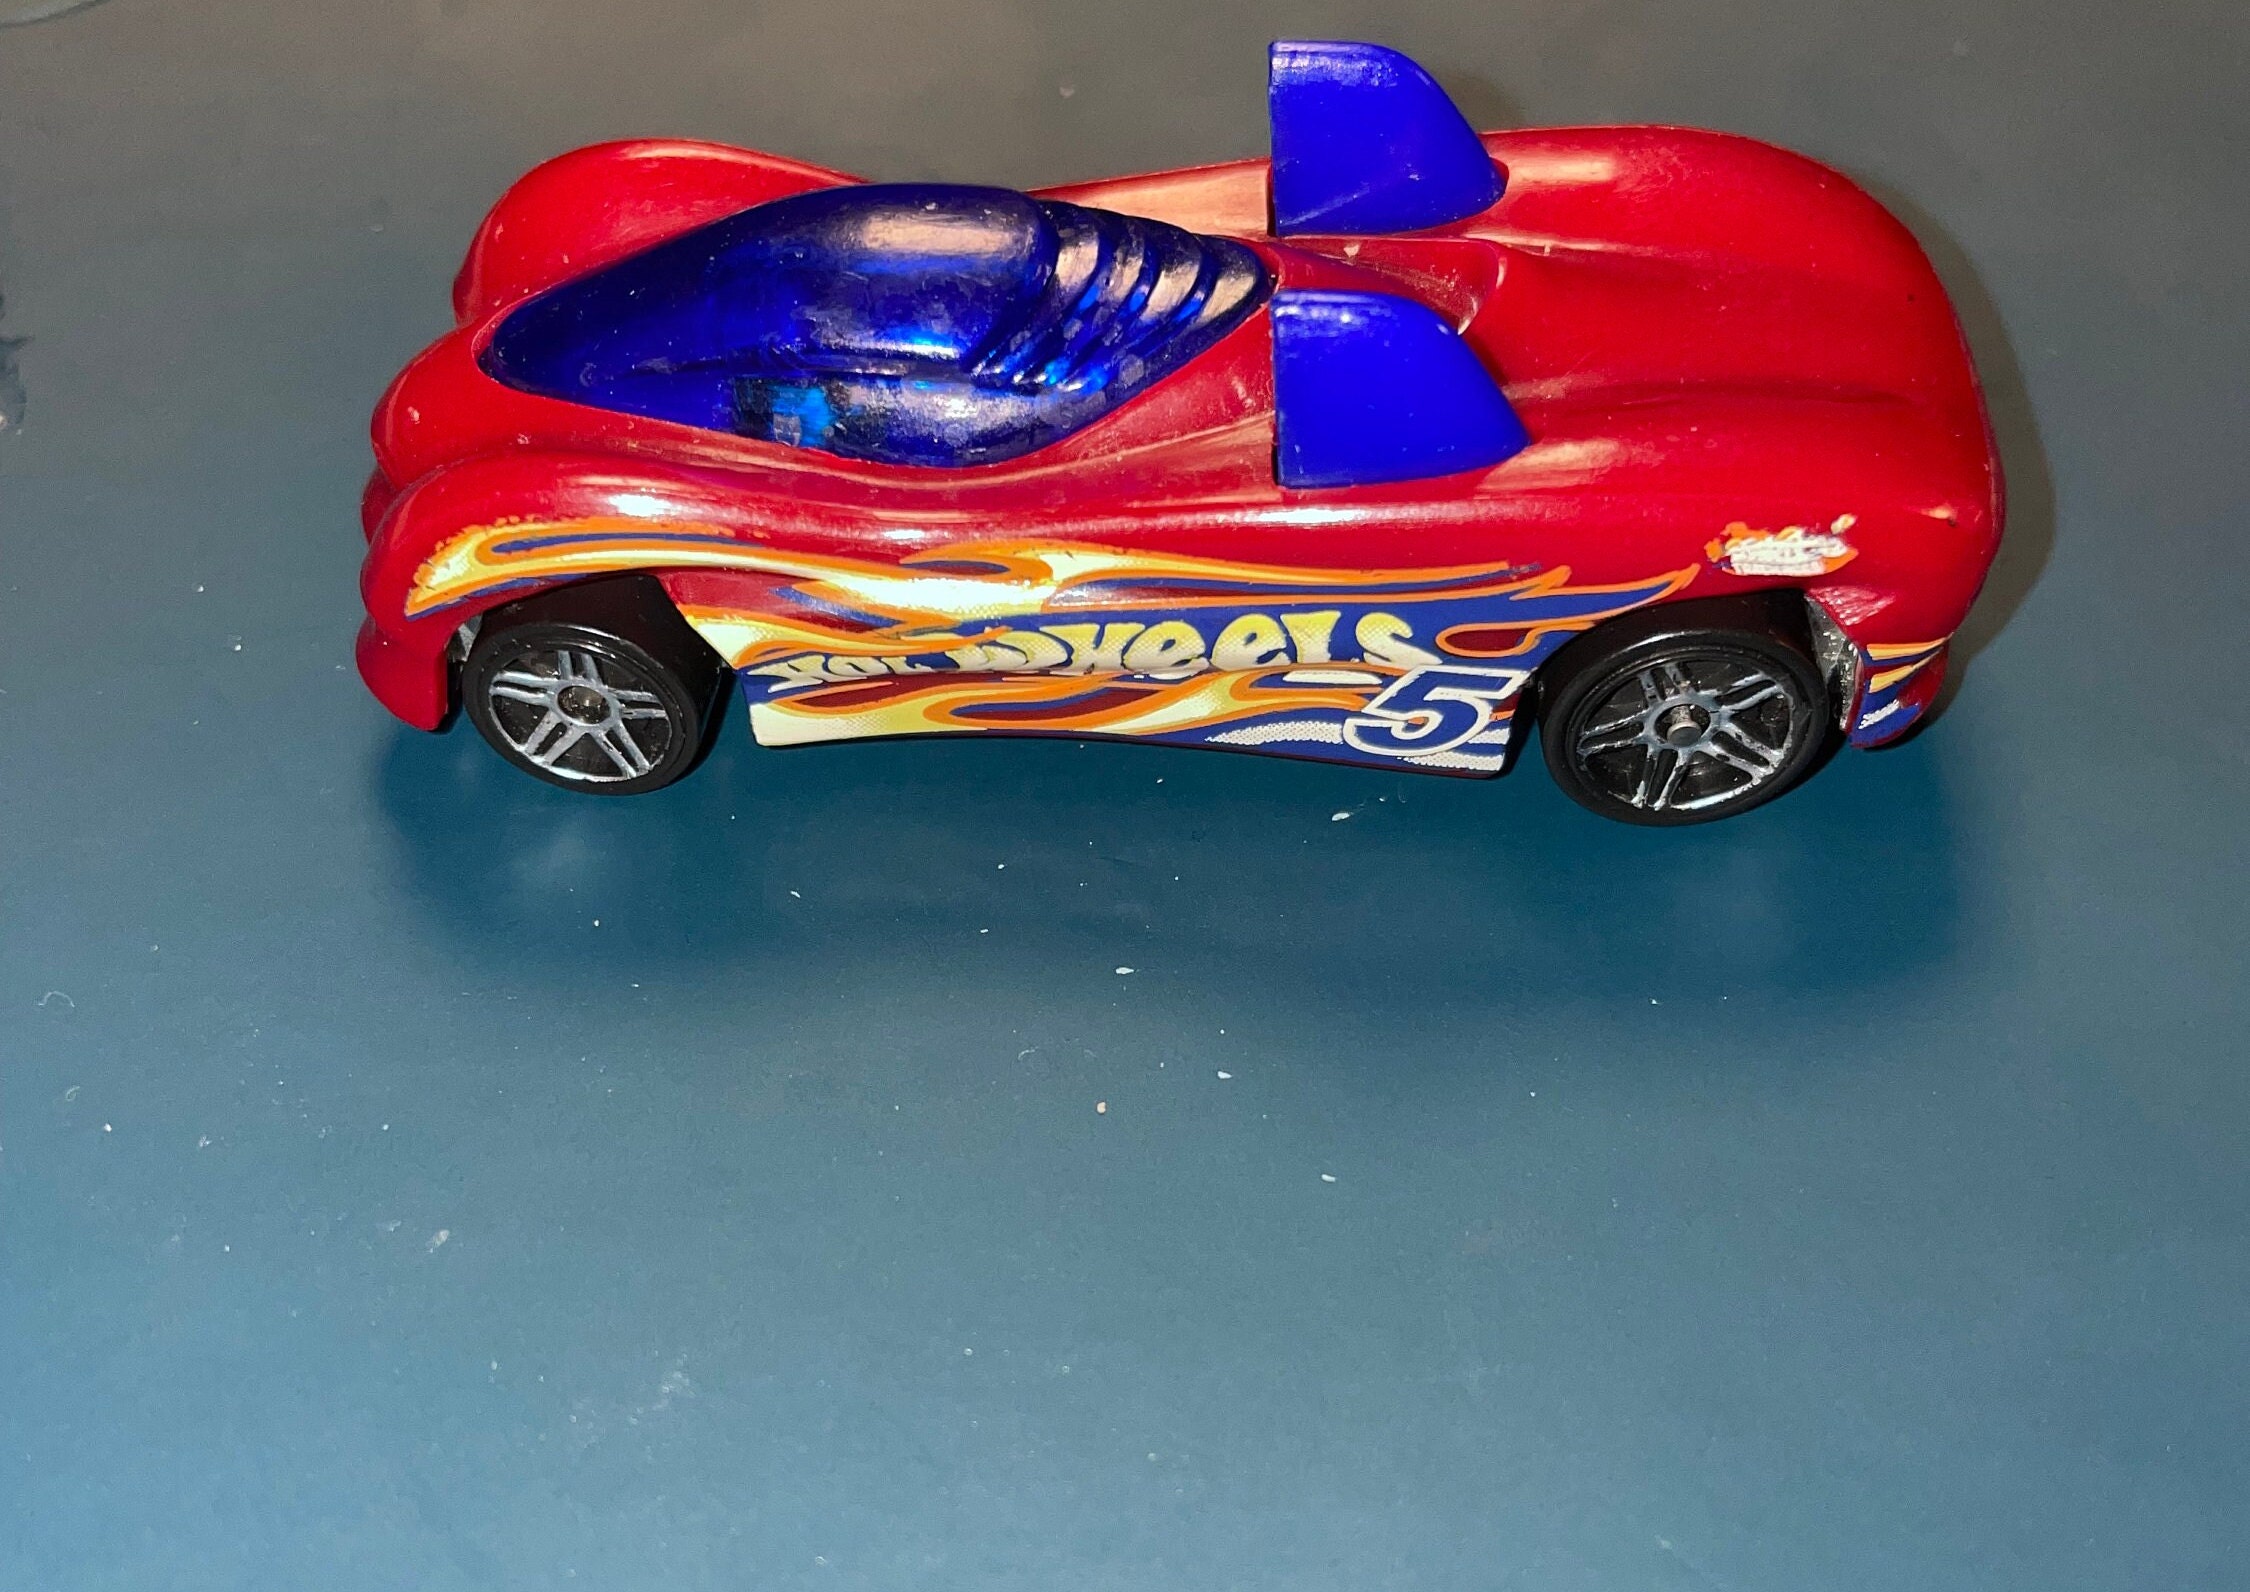 1999 Hot Wheels Ford Nesquik #10 Race Car, Made in Thailand